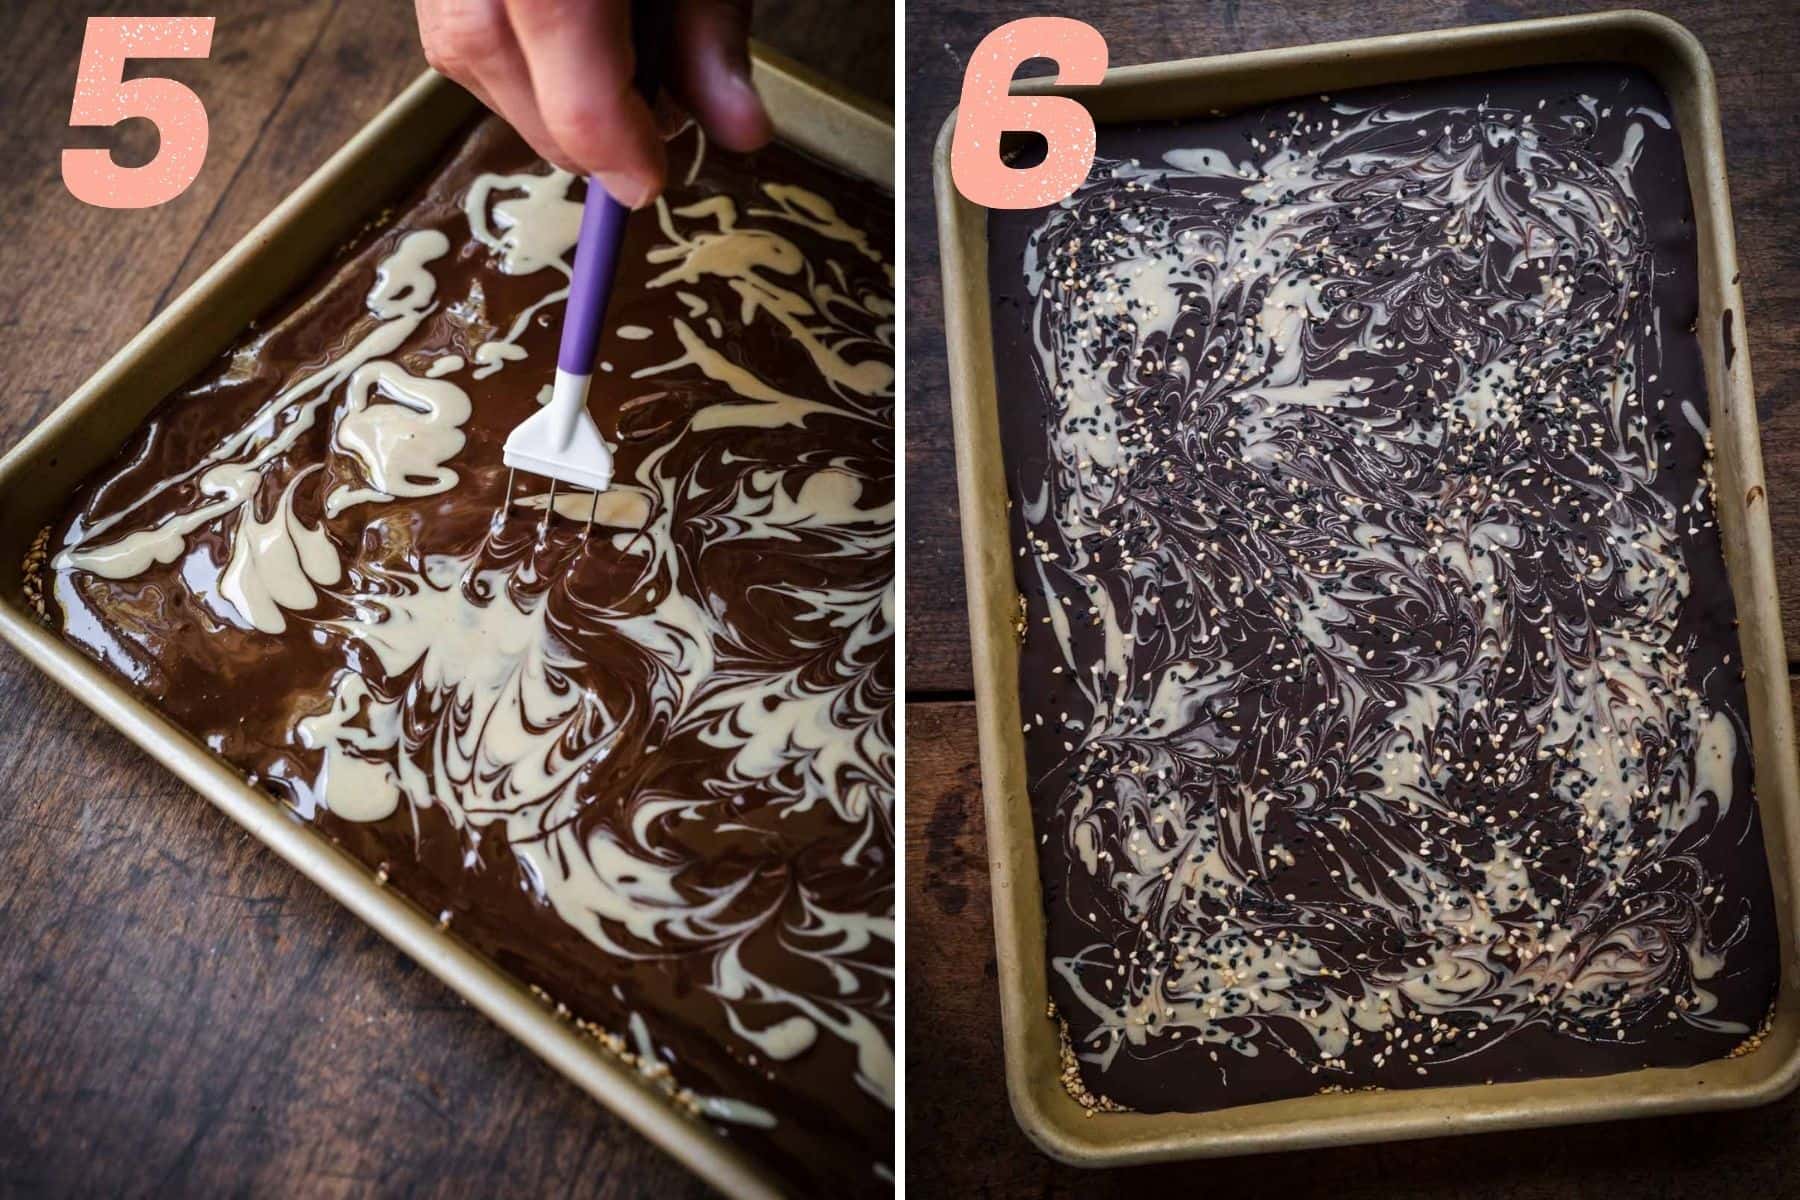 On the left: tahini added on top and being swirled around. On the right: bark after it comes out of the freezer.